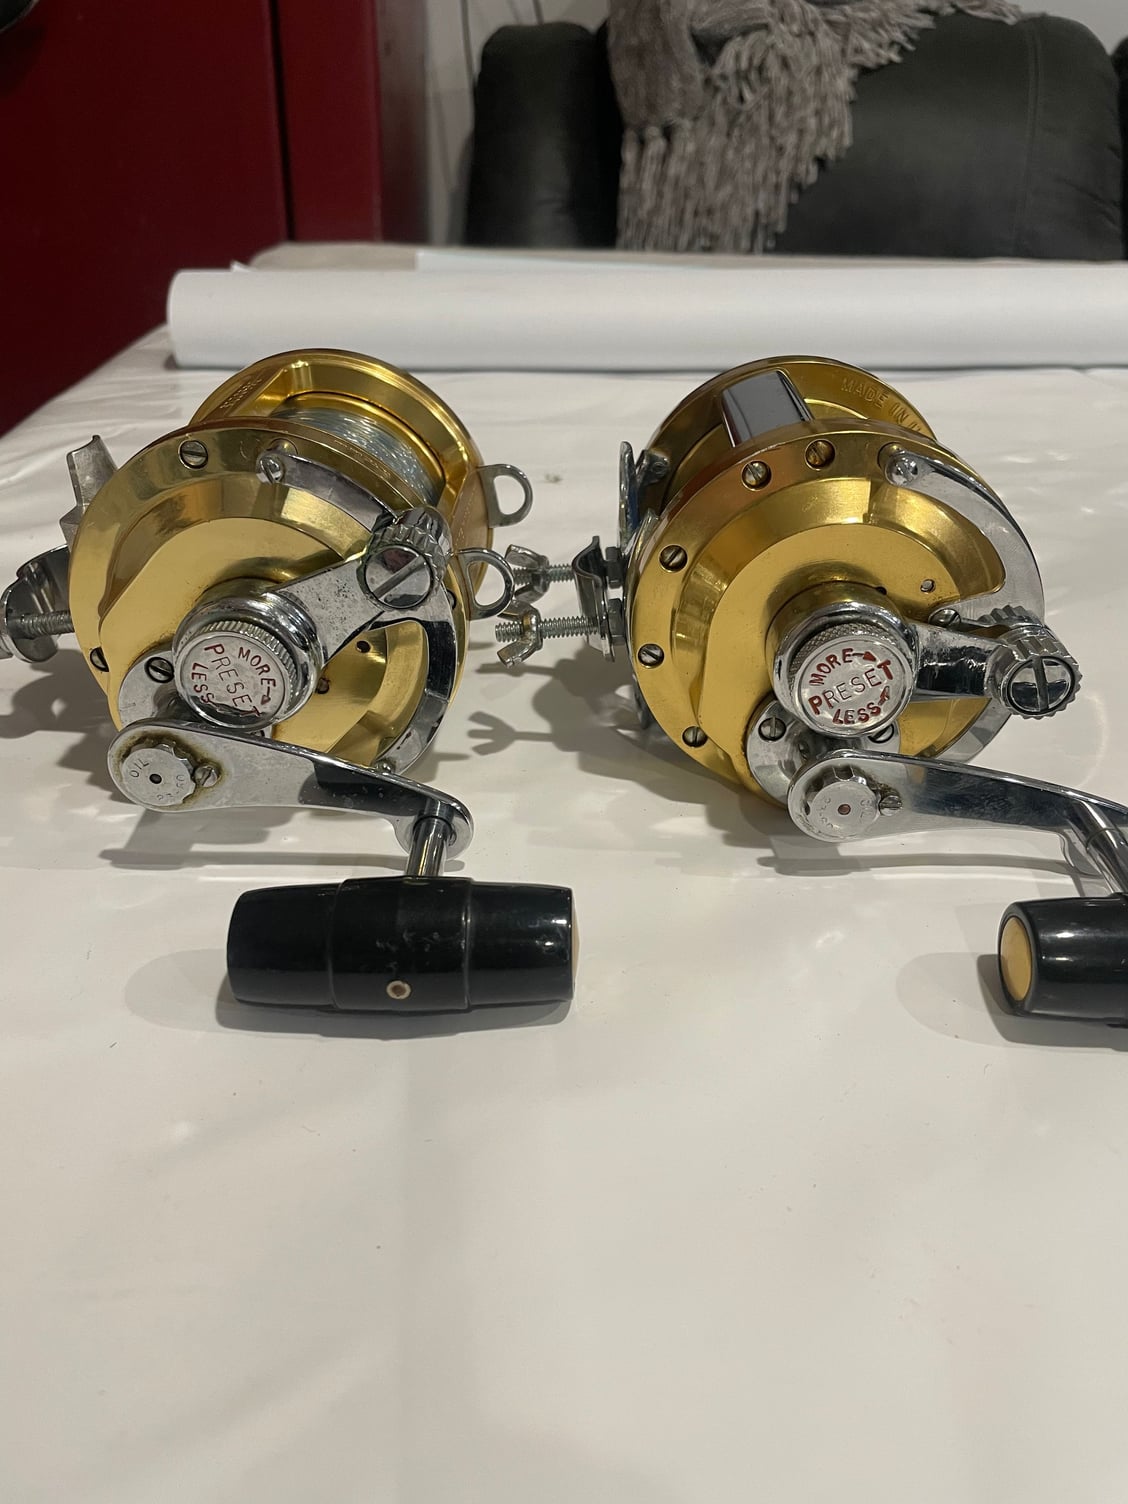 Penn International 12 reels - The Hull Truth - Boating and Fishing